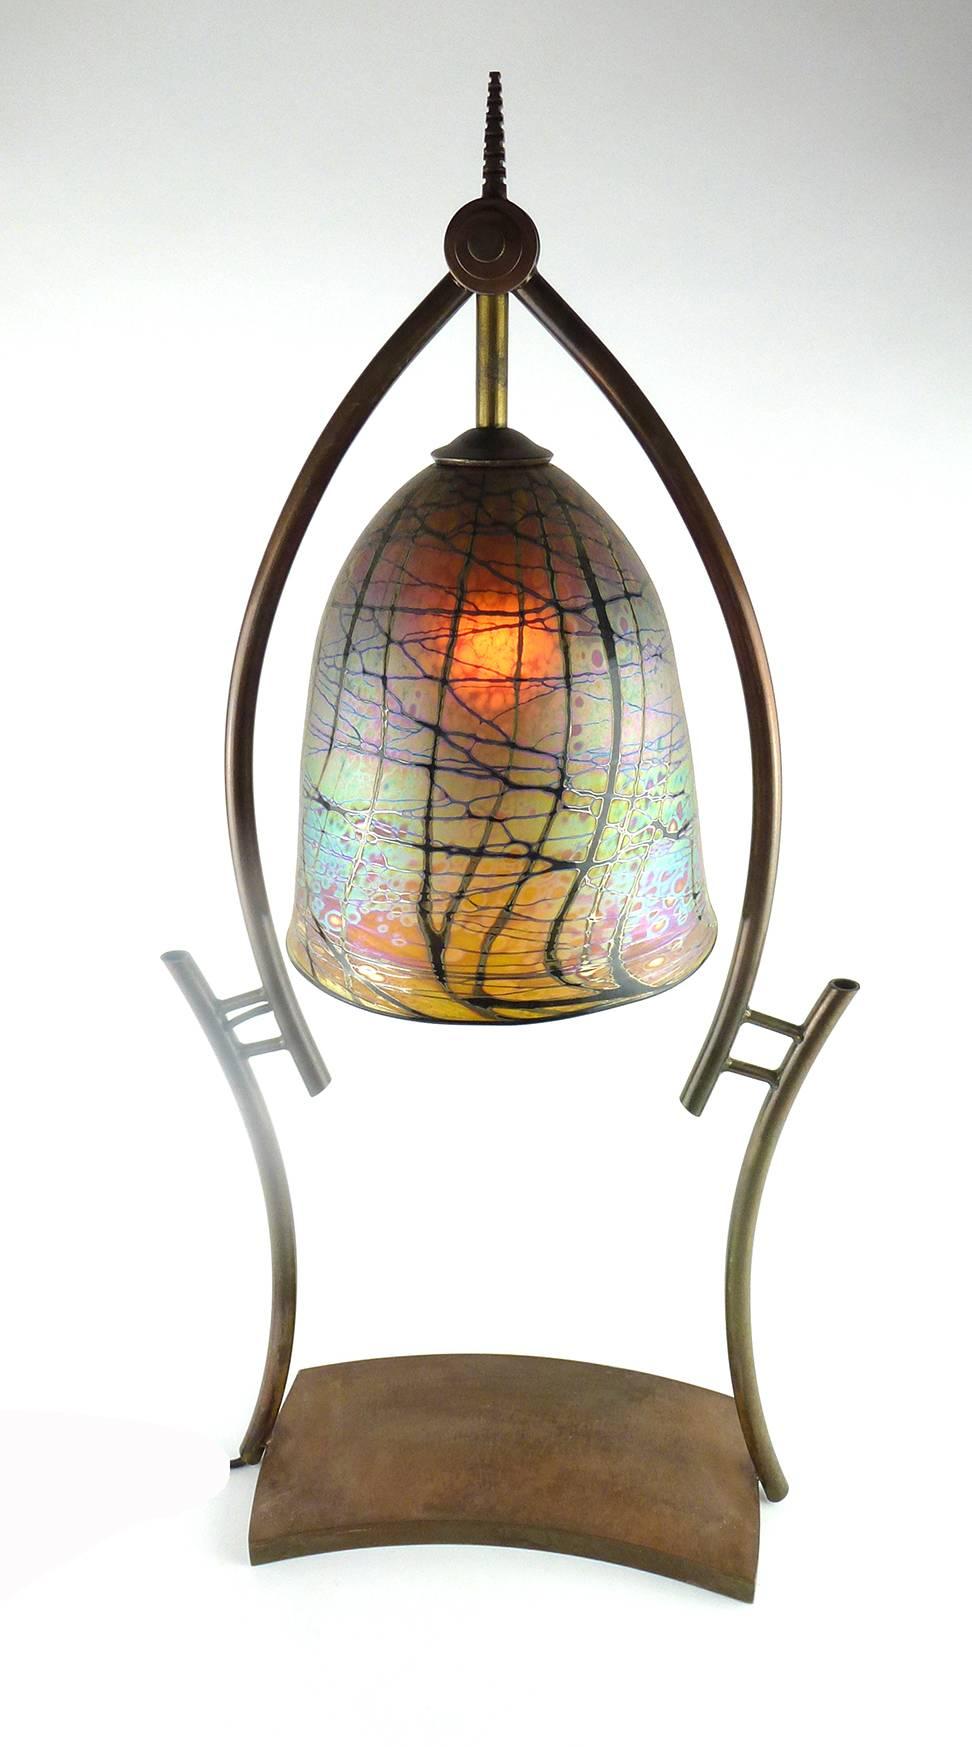 Joe Clearman contemporary Studio Art glass table lamp

Joe Clearman contemporary Studio Art glass table lamp, the shade of gold iridescent glass with metallic enamels and brown-black abstract wraps, pendant from and framed by a copper-finish metal